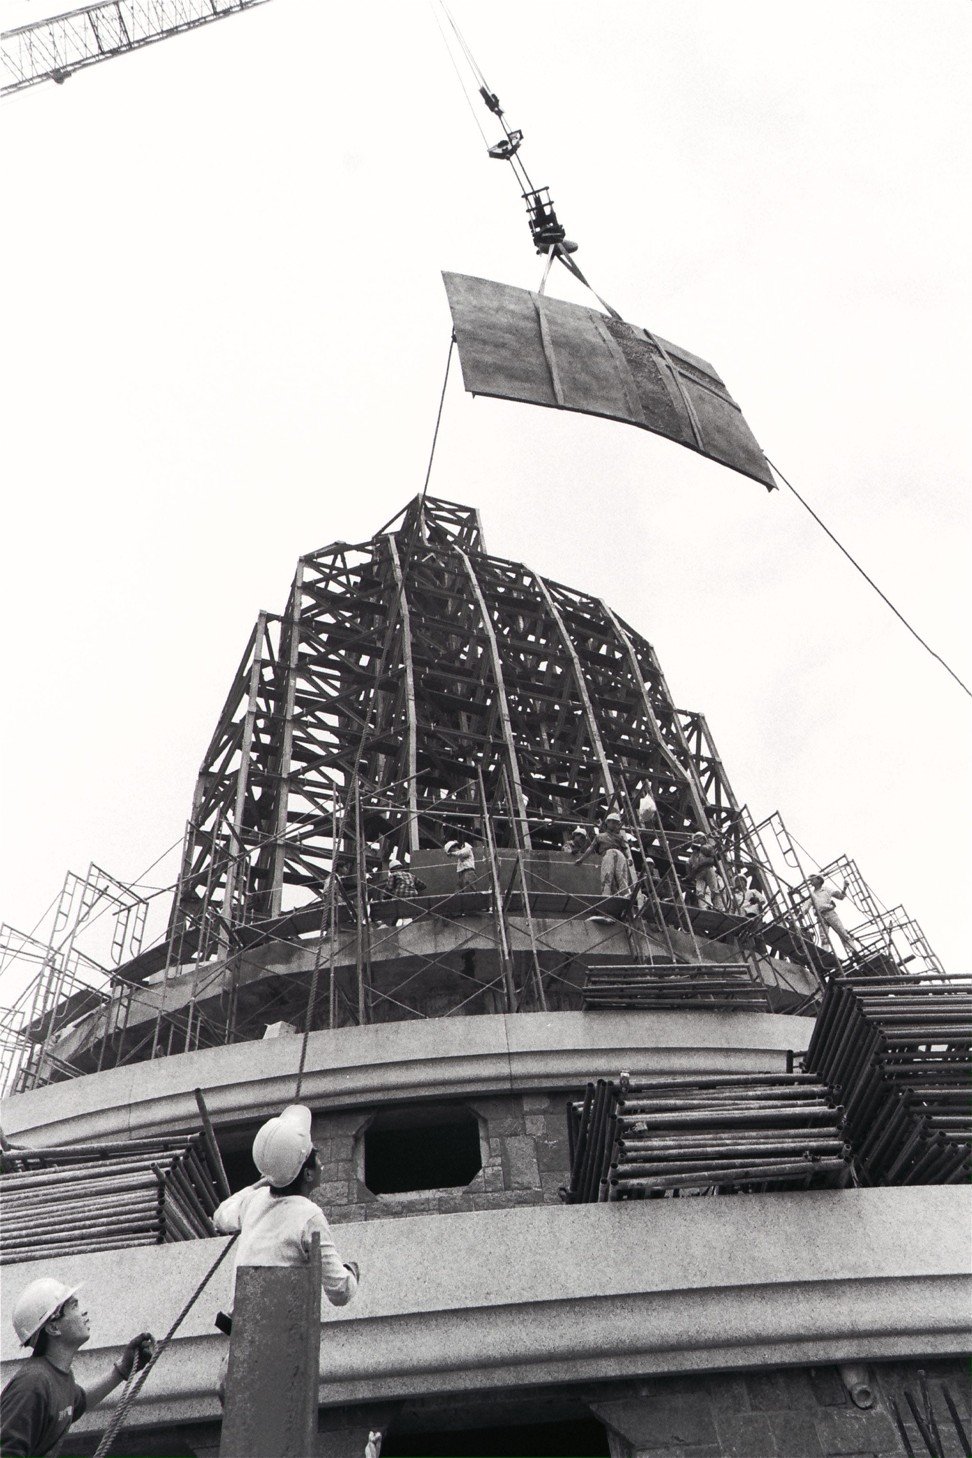 One of the bronze plates from which the Bib Buddha is built is hoisted towards the frame of the statue. Photo: SCMP